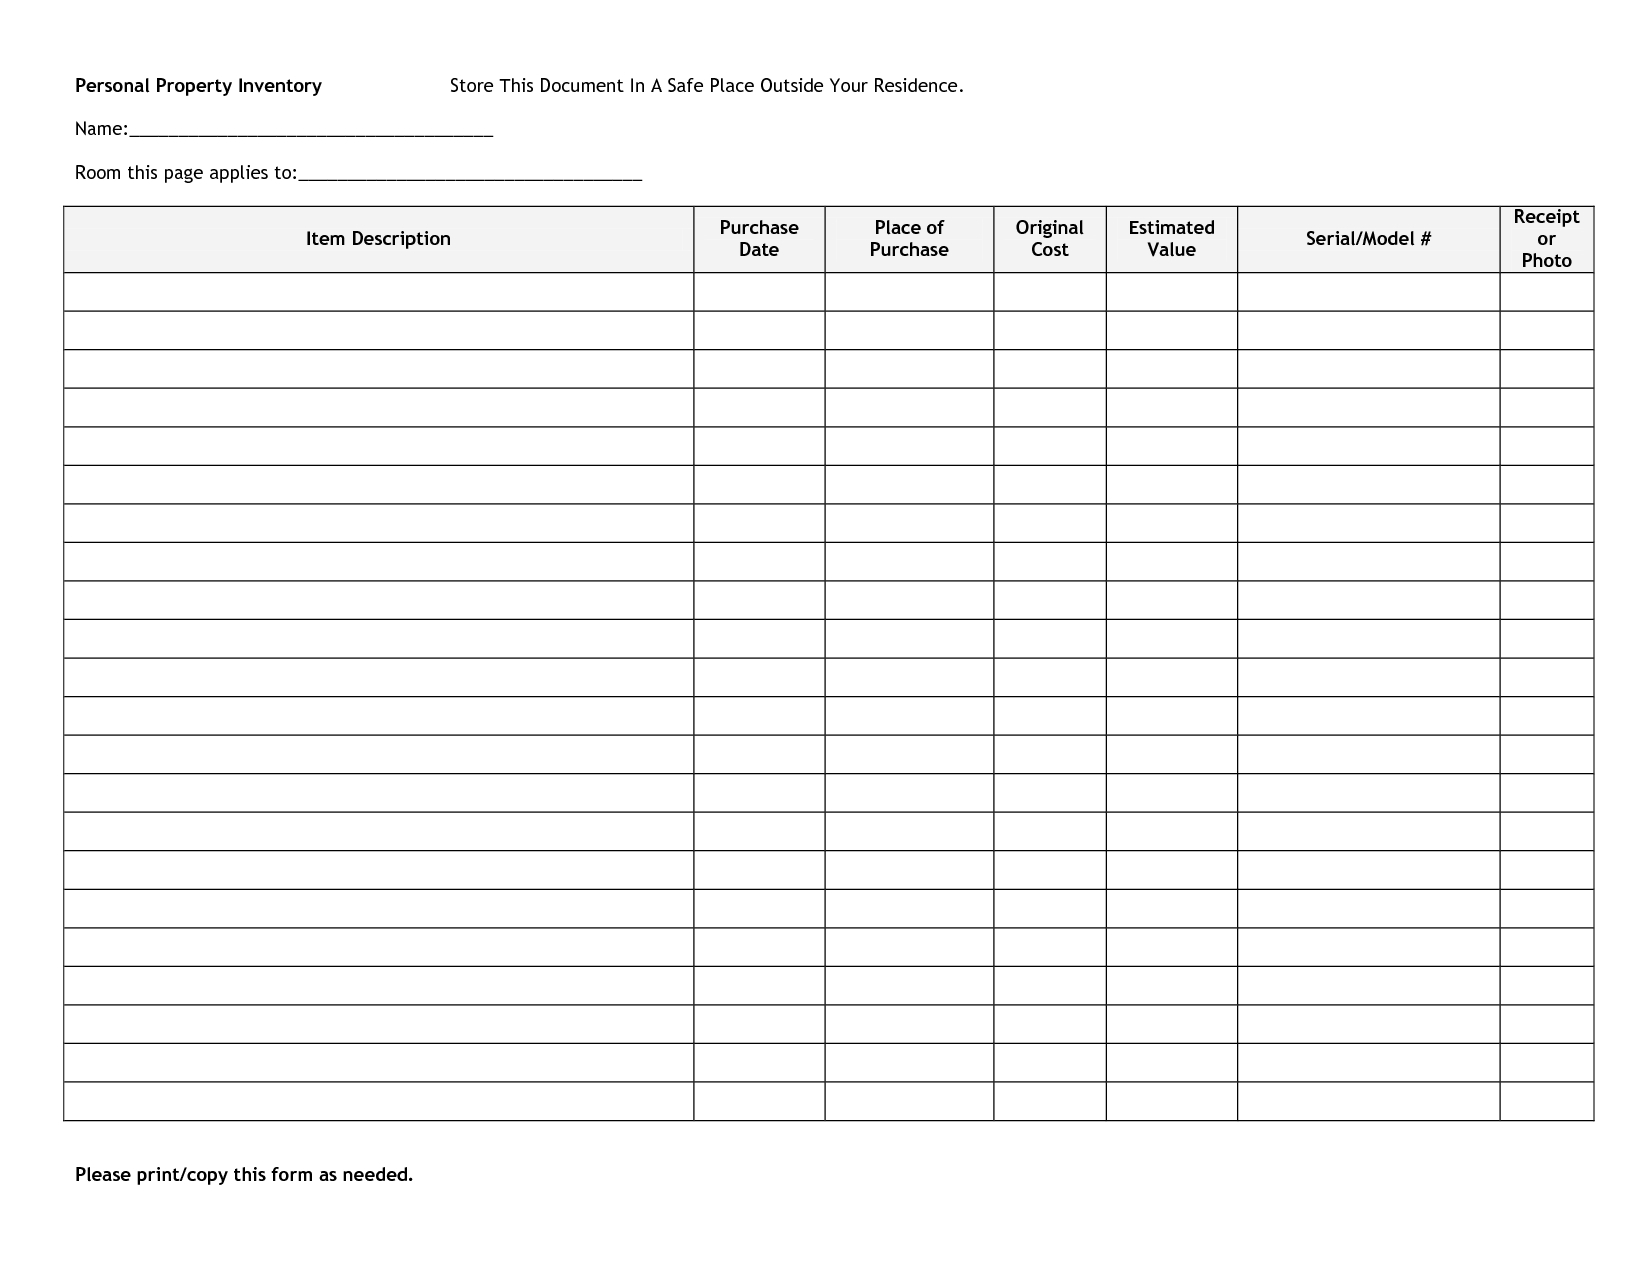 Personal Asset Inventory Spreadsheet intended for Business Personal Inventory Tracking And Checklist Template Sample